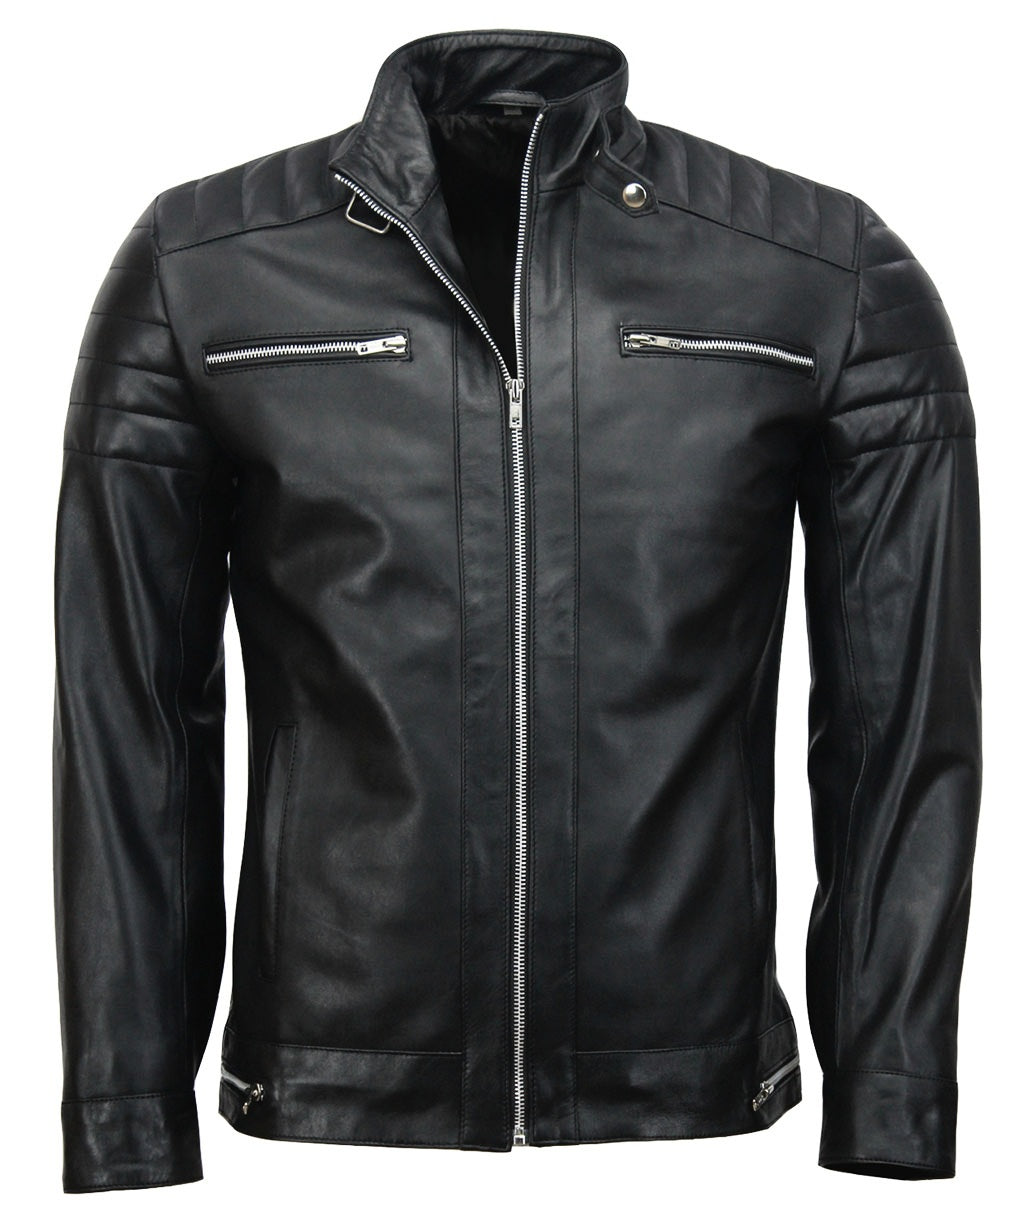 Andrew Tate Top G Black Leather Jacket